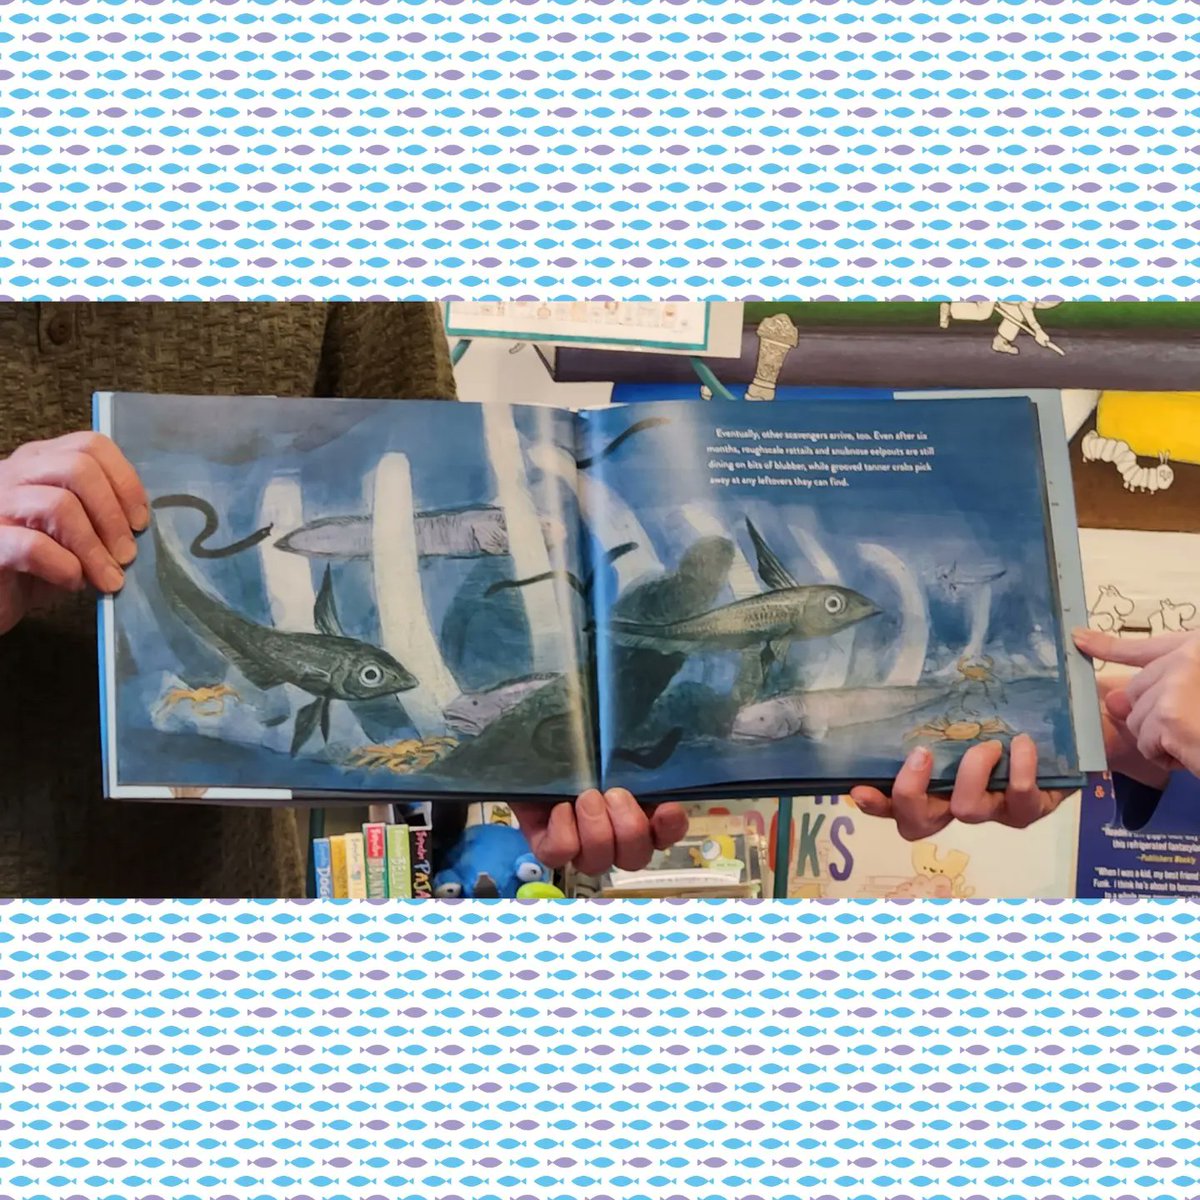 Celebrating WHALE FALL with @mstewartscience & #RobDunlavey at @SilUnicornActon 🐋🌊🦑🪼! Snagged my signed copy 🥳. 

Don't miss this stunning & poetic #STEM  #oceanecosystem #picturebook @SteamTeamBooks
From @randomhousekids 
#kidslovenonfiction